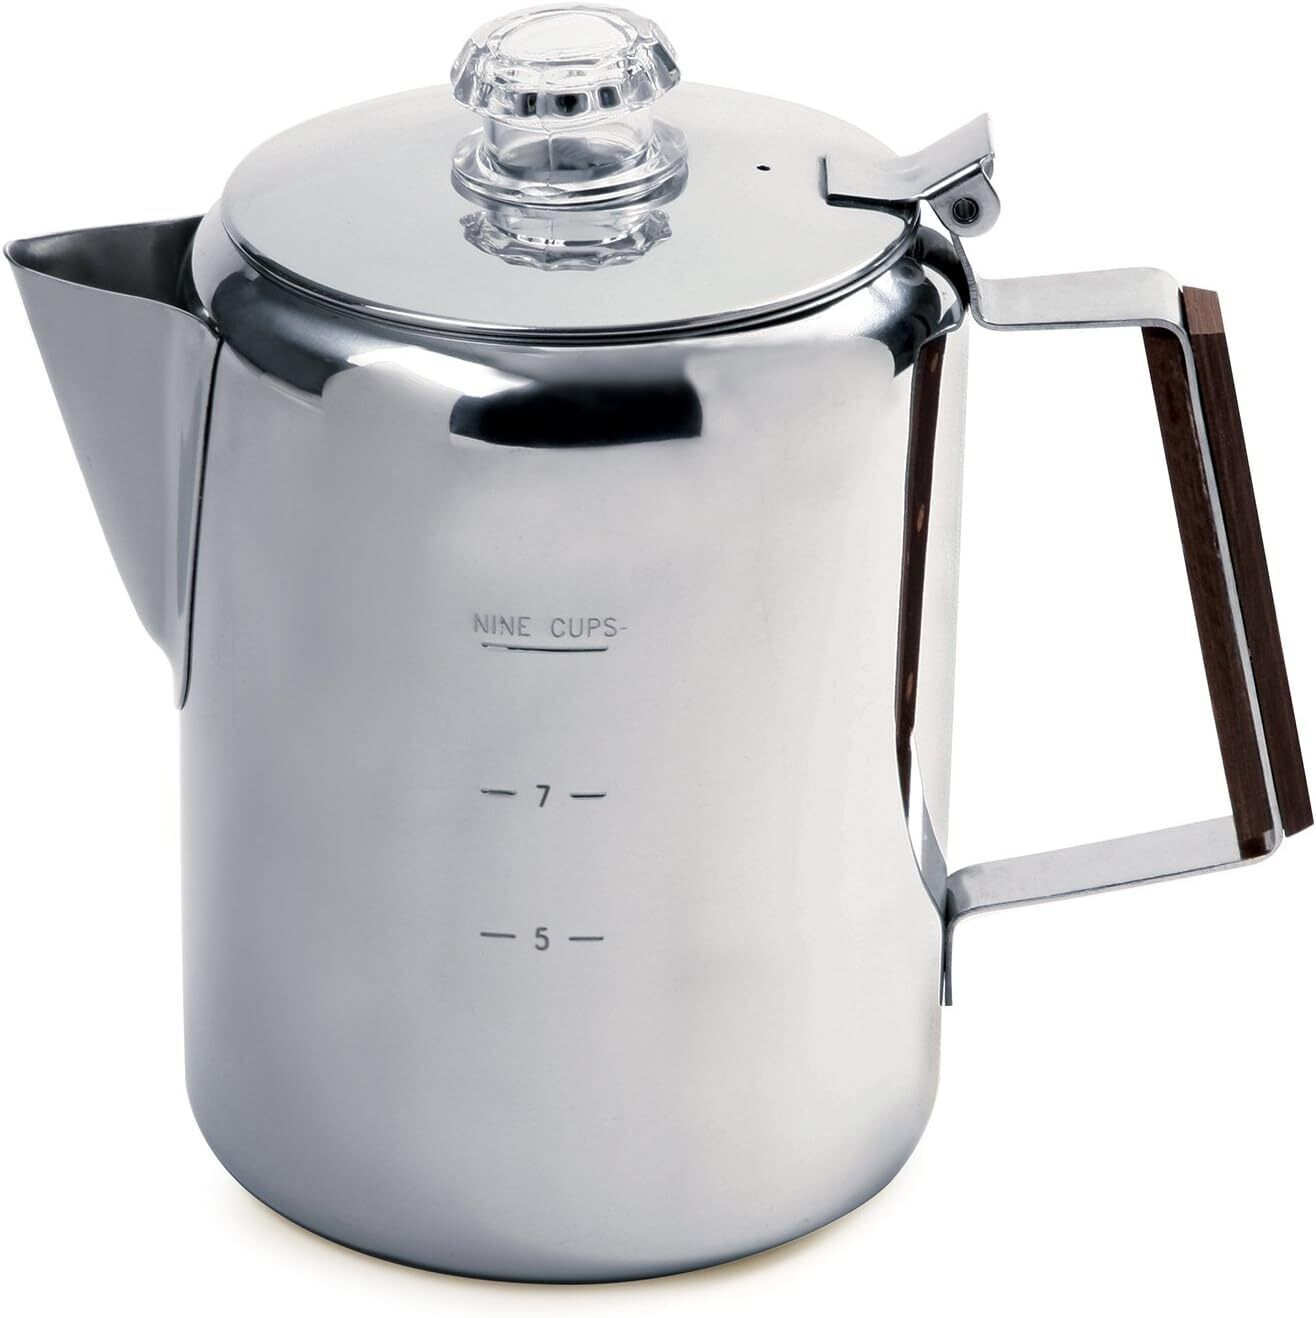 Stainless Steel 9-Cup Percolator Norpro